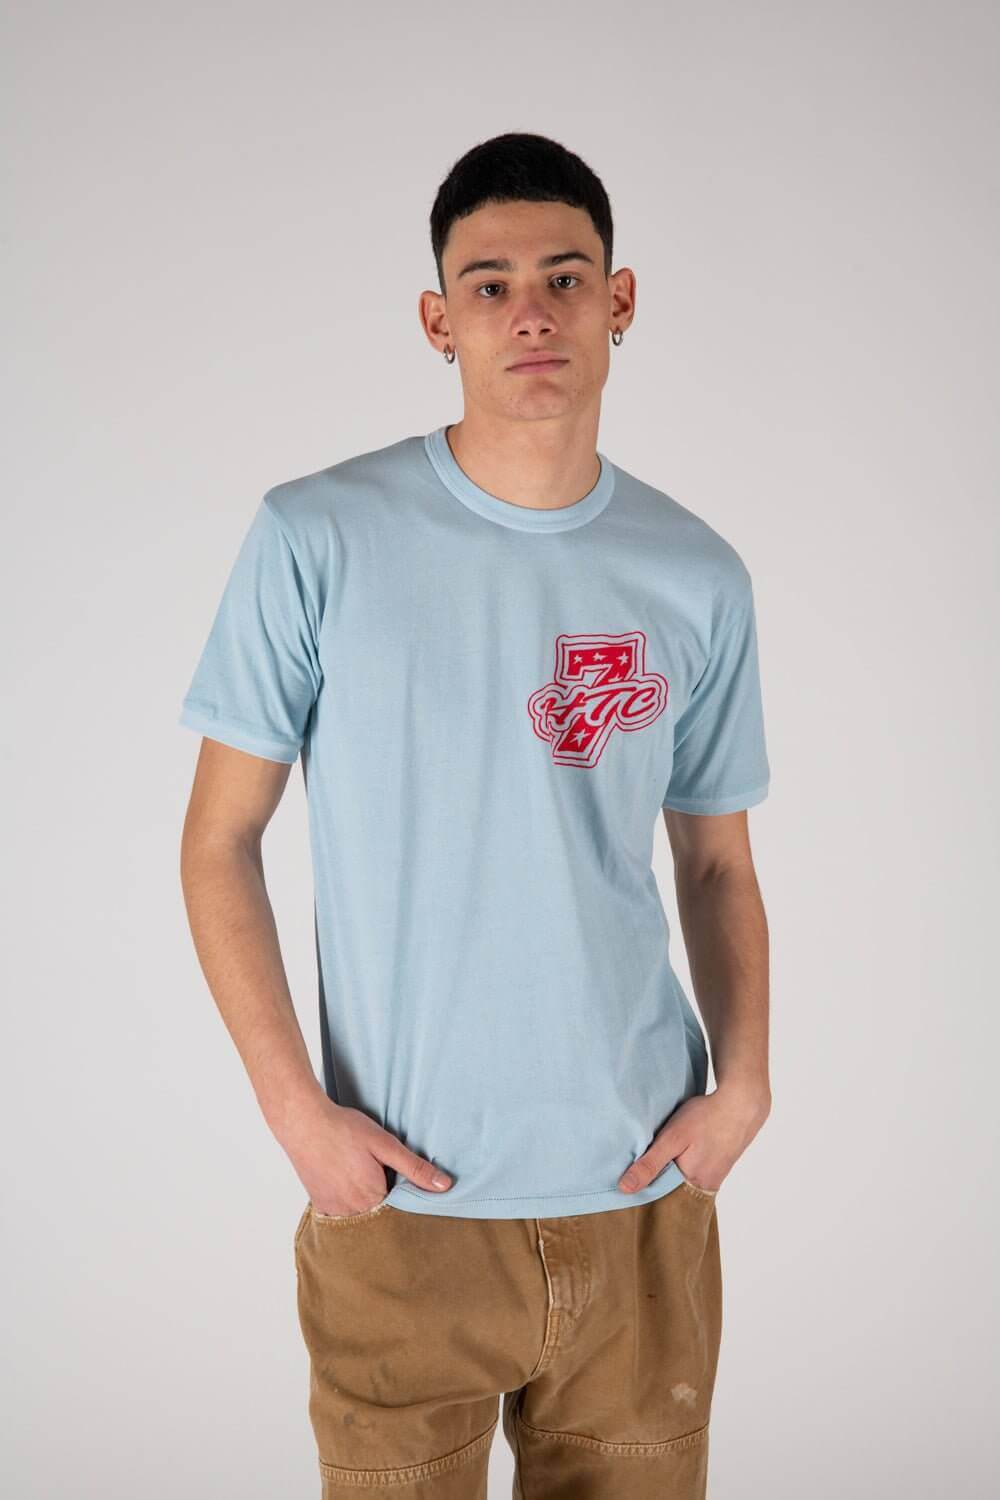 ARMLESS - AKA7 Regular fit t-shirt with printed 7 logo on the front. Composition: 100% Cotton HTC LOS ANGELES